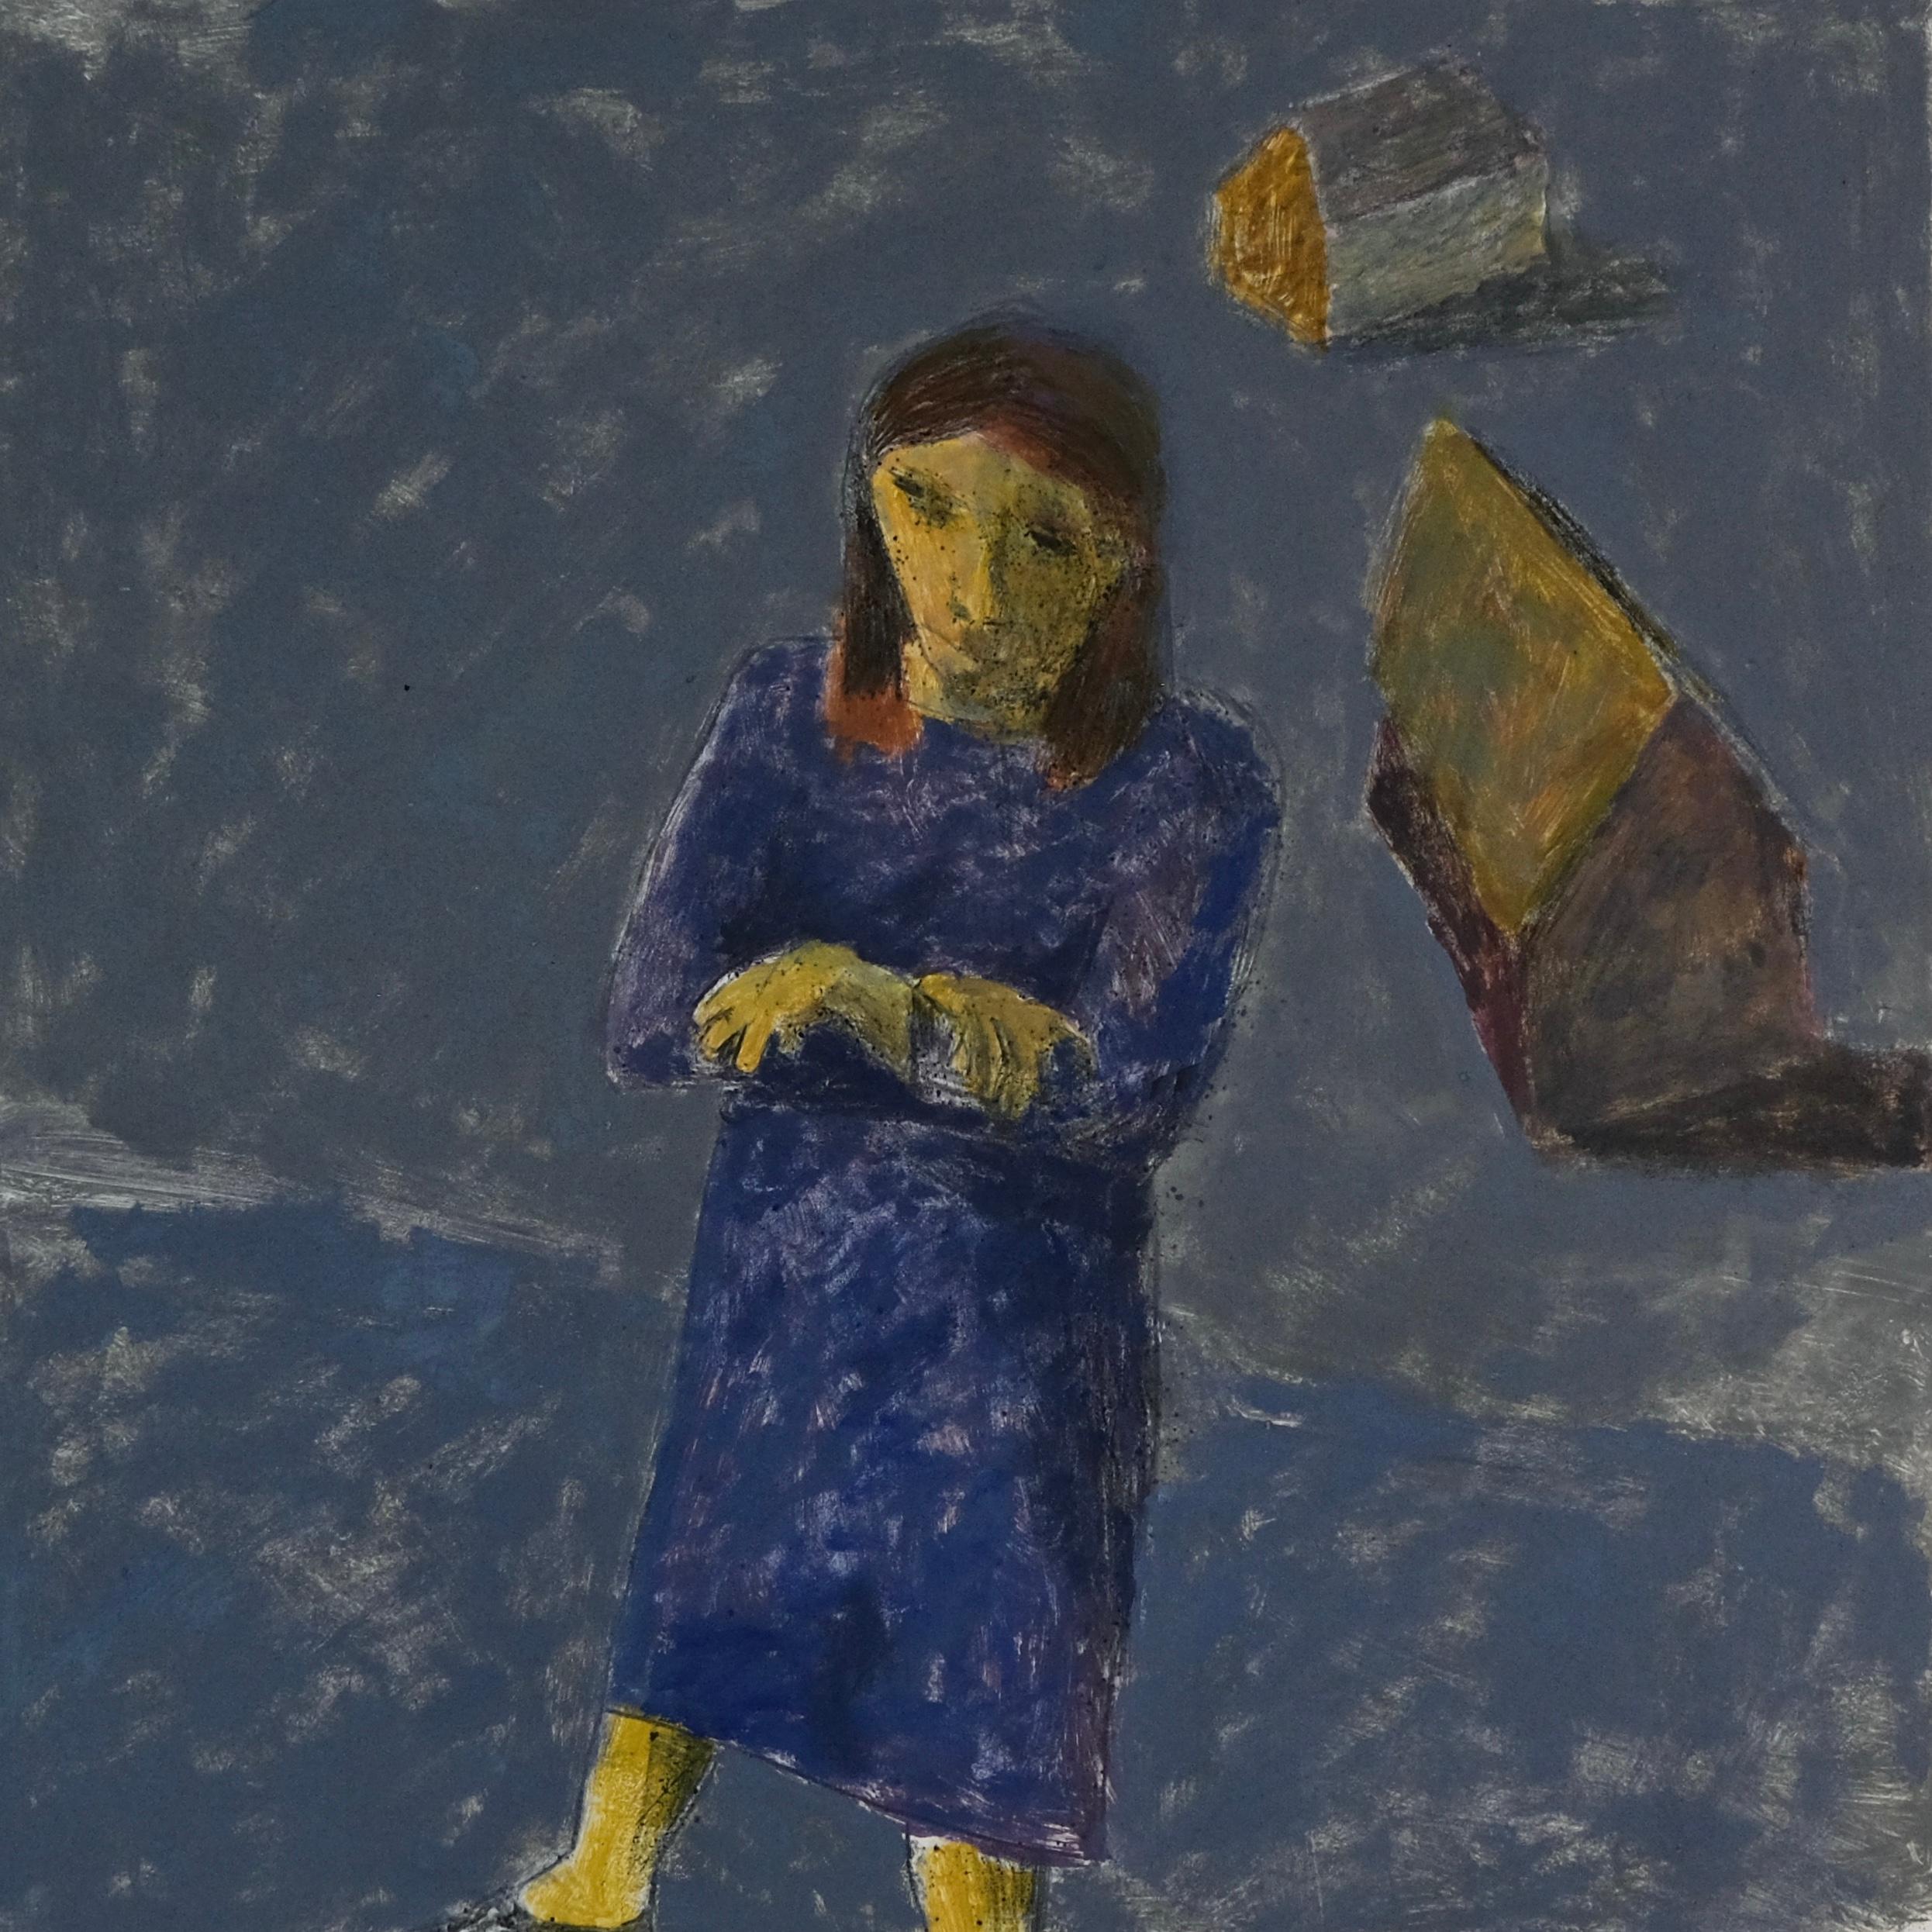 Catherine Moves from her Past, portrait of young woman, blue